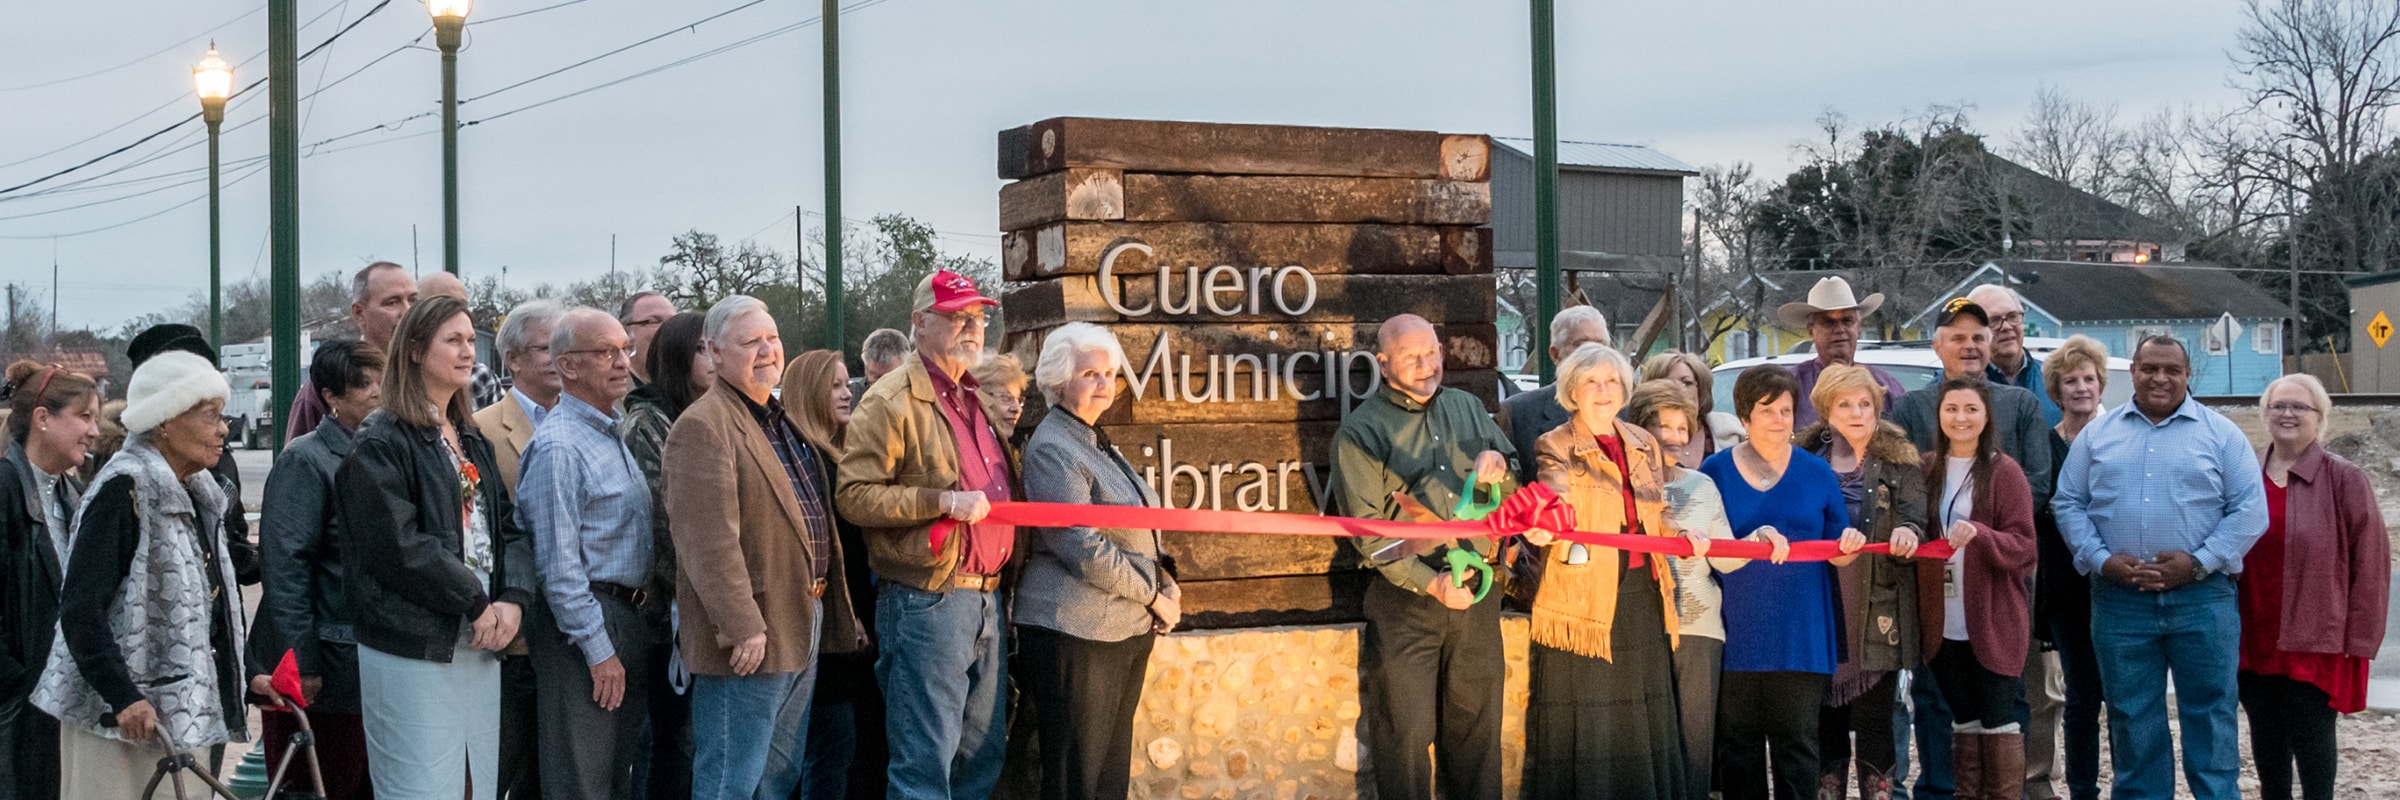 cuero library ribbon cutting in front of signage